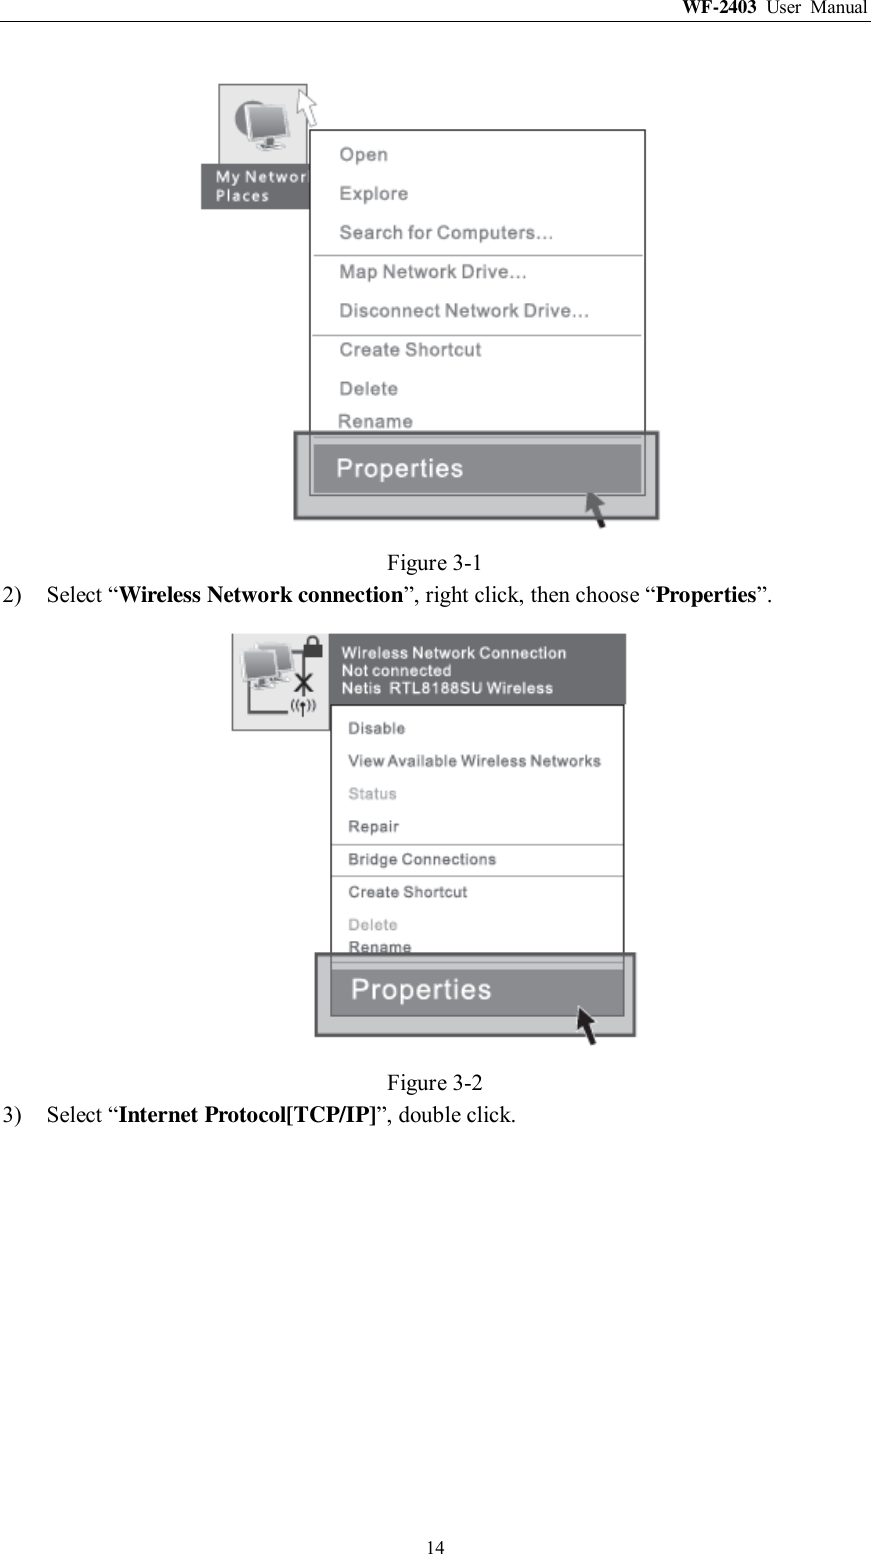 WF-2403  User  Manual  14  Figure 3-1 2) Select “Wireless Network connection”, right click, then choose “Properties”.  Figure 3-2 3) Select “Internet Protocol[TCP/IP]”, double click. 